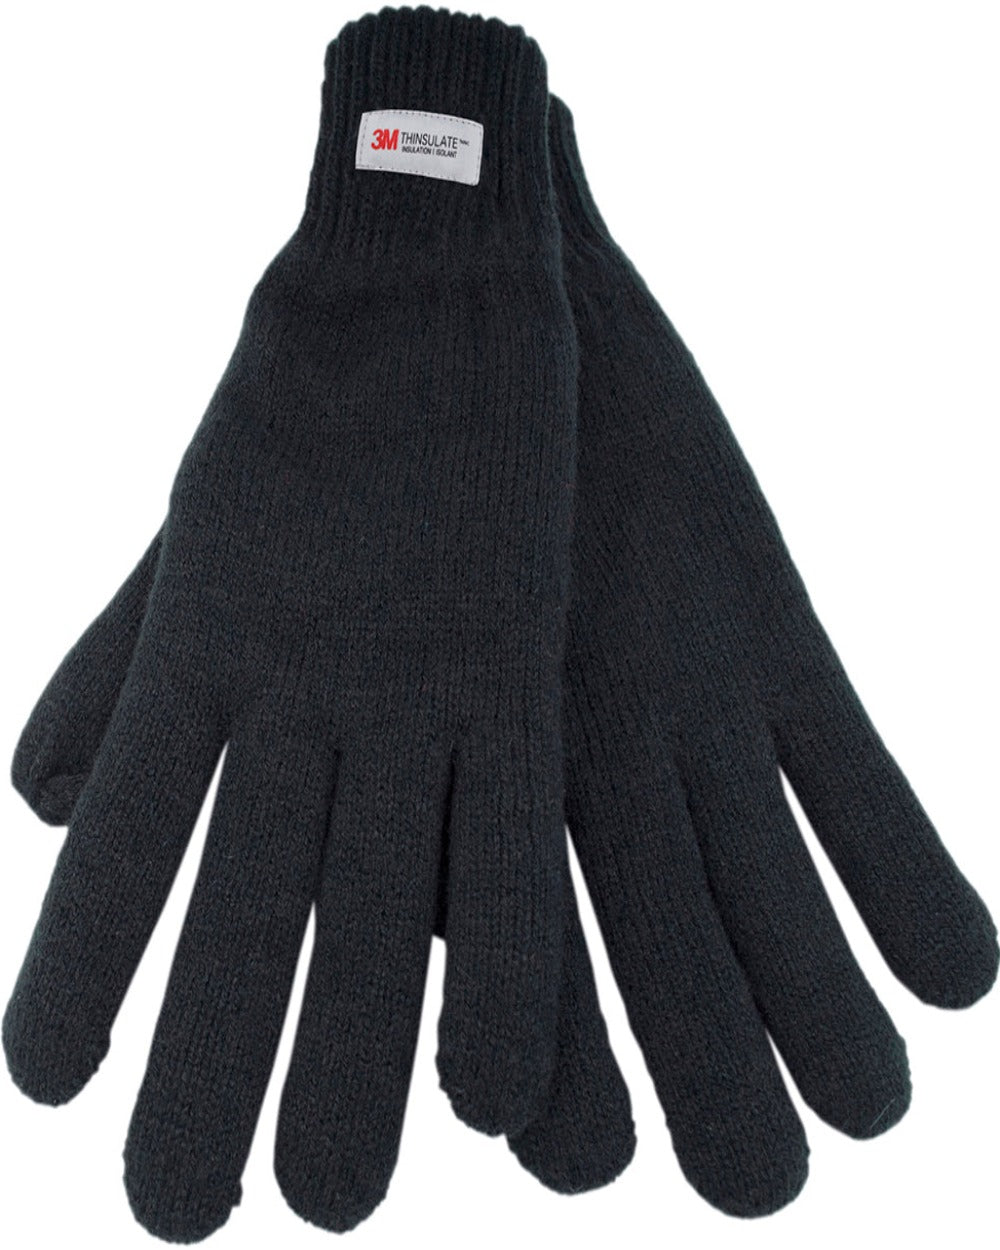 mens thinsulate thermal gloves warm winter woolies gloves black knitted